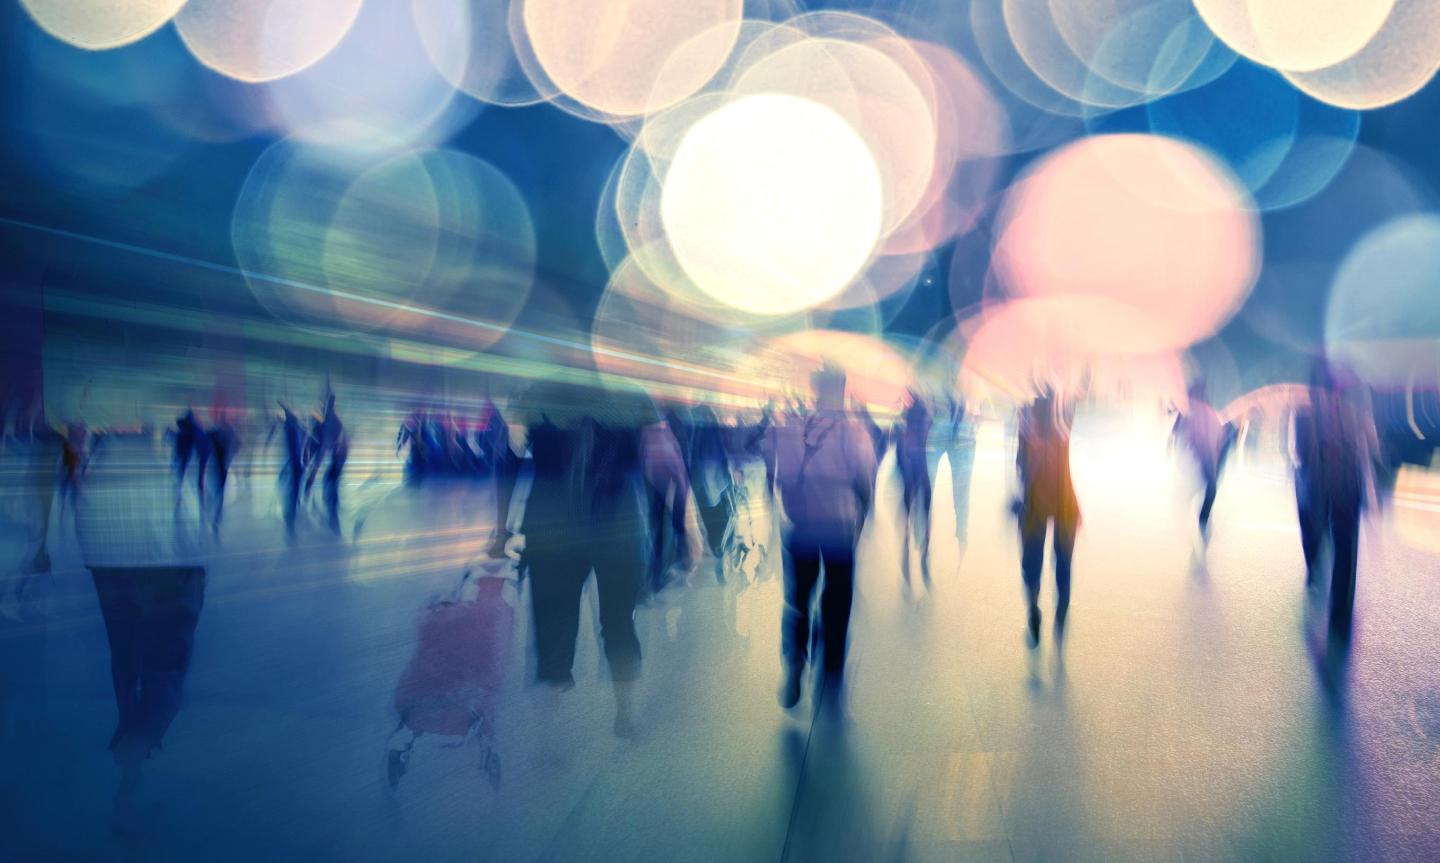 Many people walking in an artistically colourful and blurred image